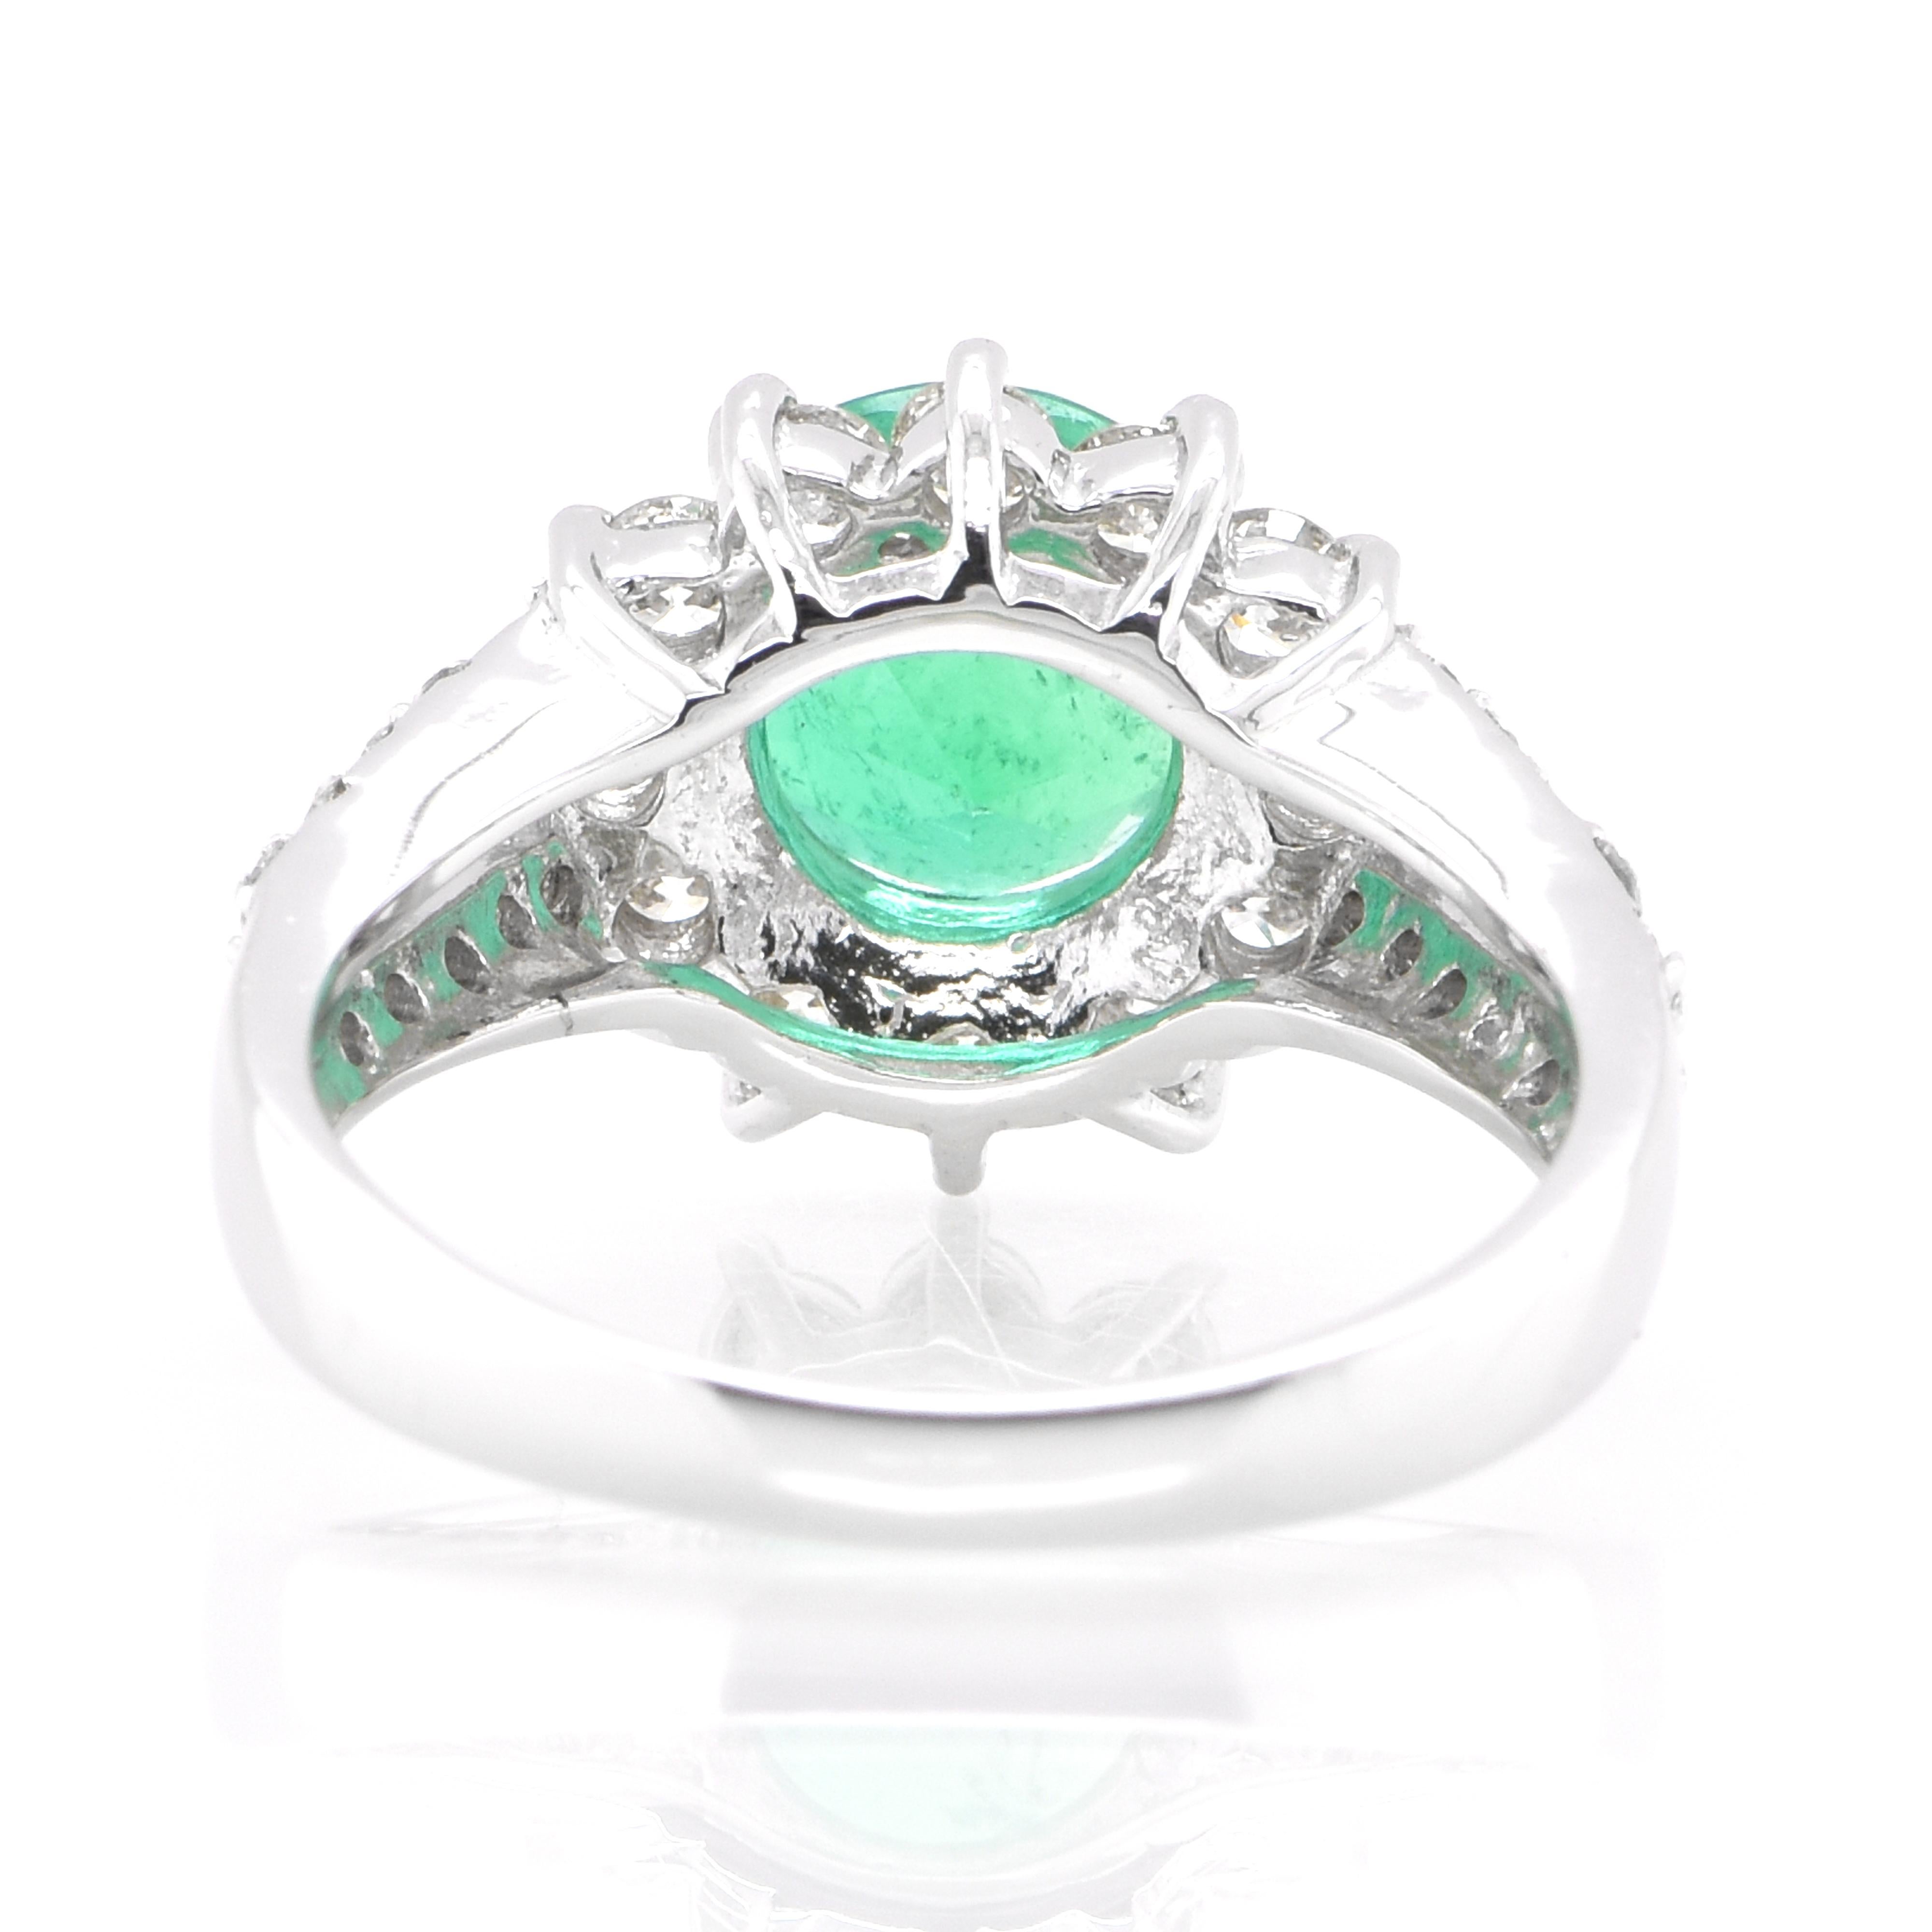 1.74 Carat Natural Colombian, Round-Cut Emerald and Diamond Ring Set in Platinum 1